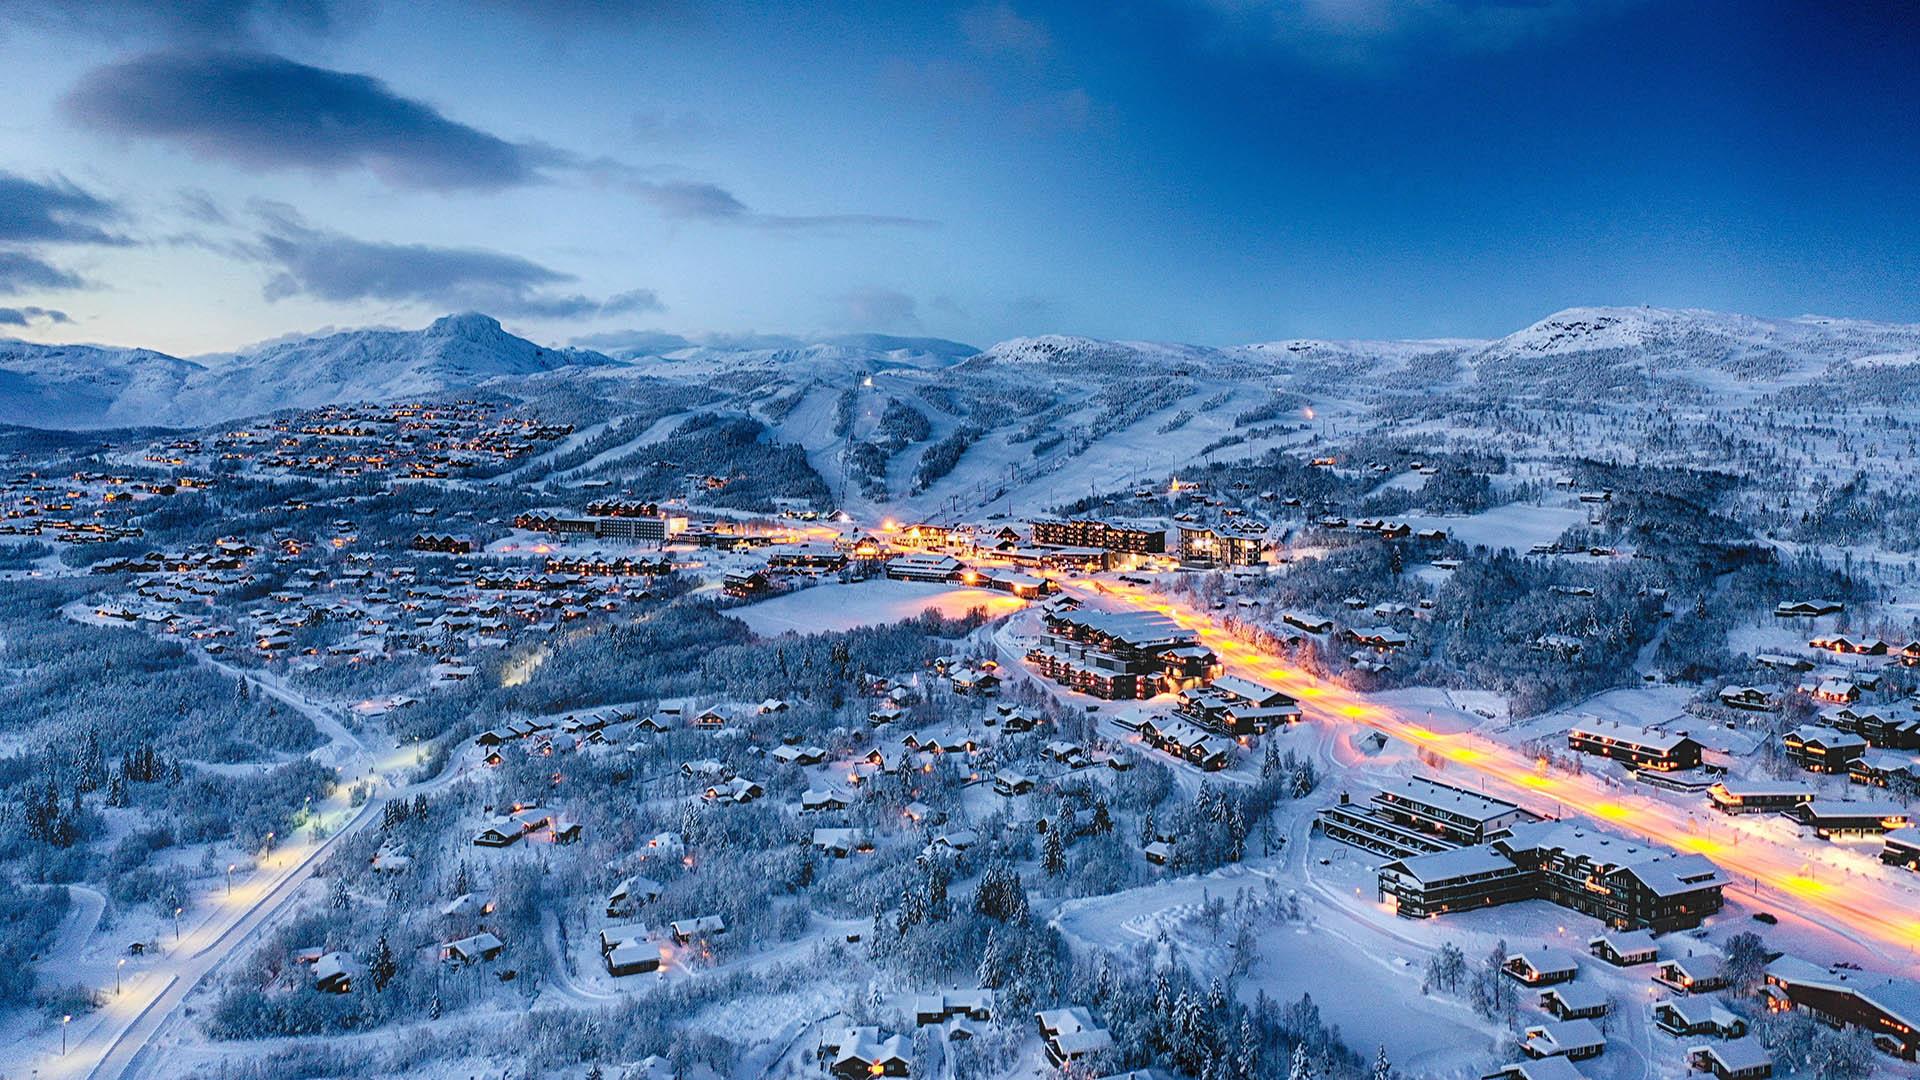 Drone image on a winter's evening during the Blue hour that shows a snowy mountain village with a road lit by street lights, some alpine slopes and mountains on the far horizon